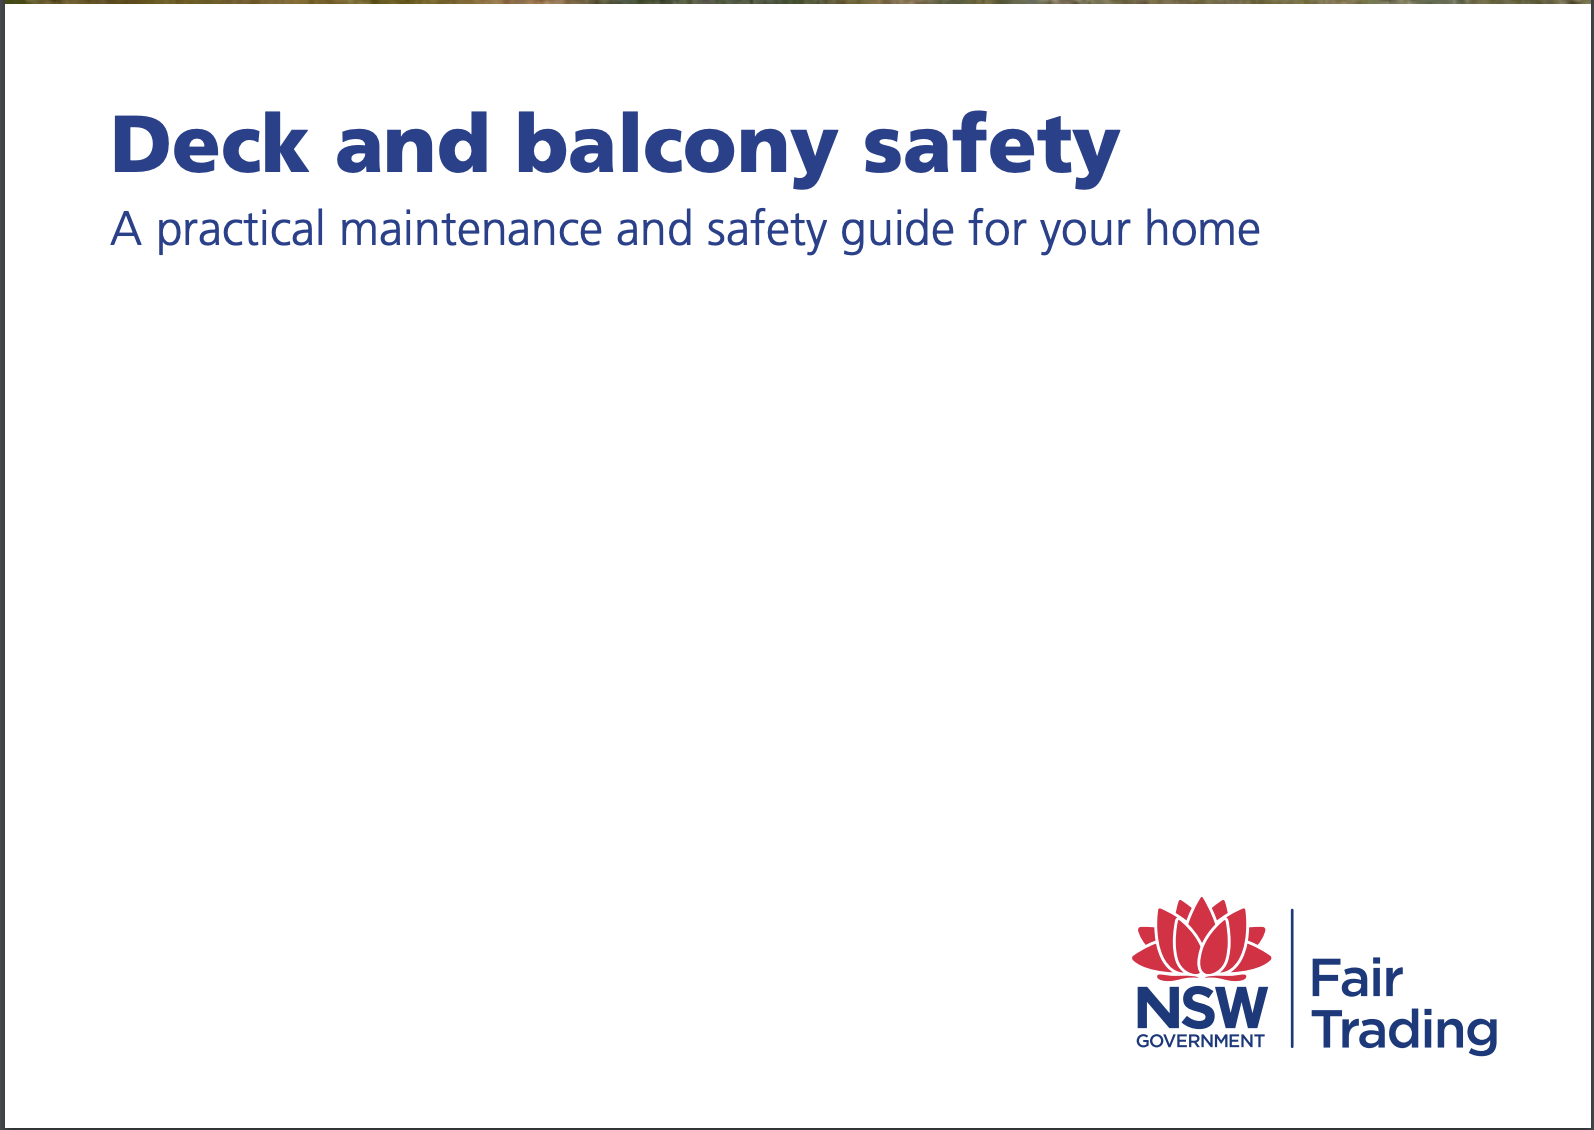 NSWfairtrading-Deck_and_balcony_safety_guide-feature